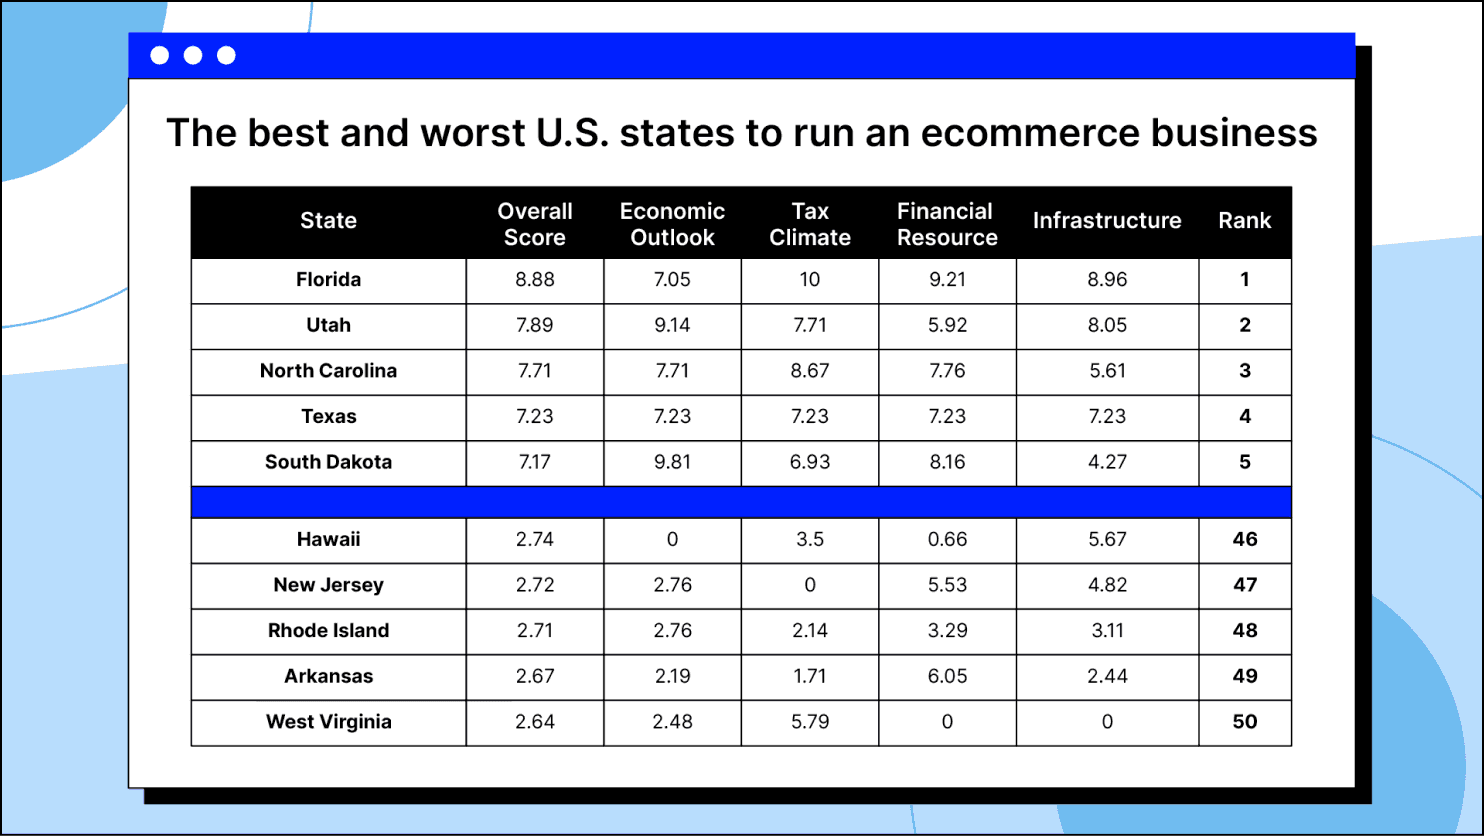 Best and worst U.S. states to run an ecommerce business.